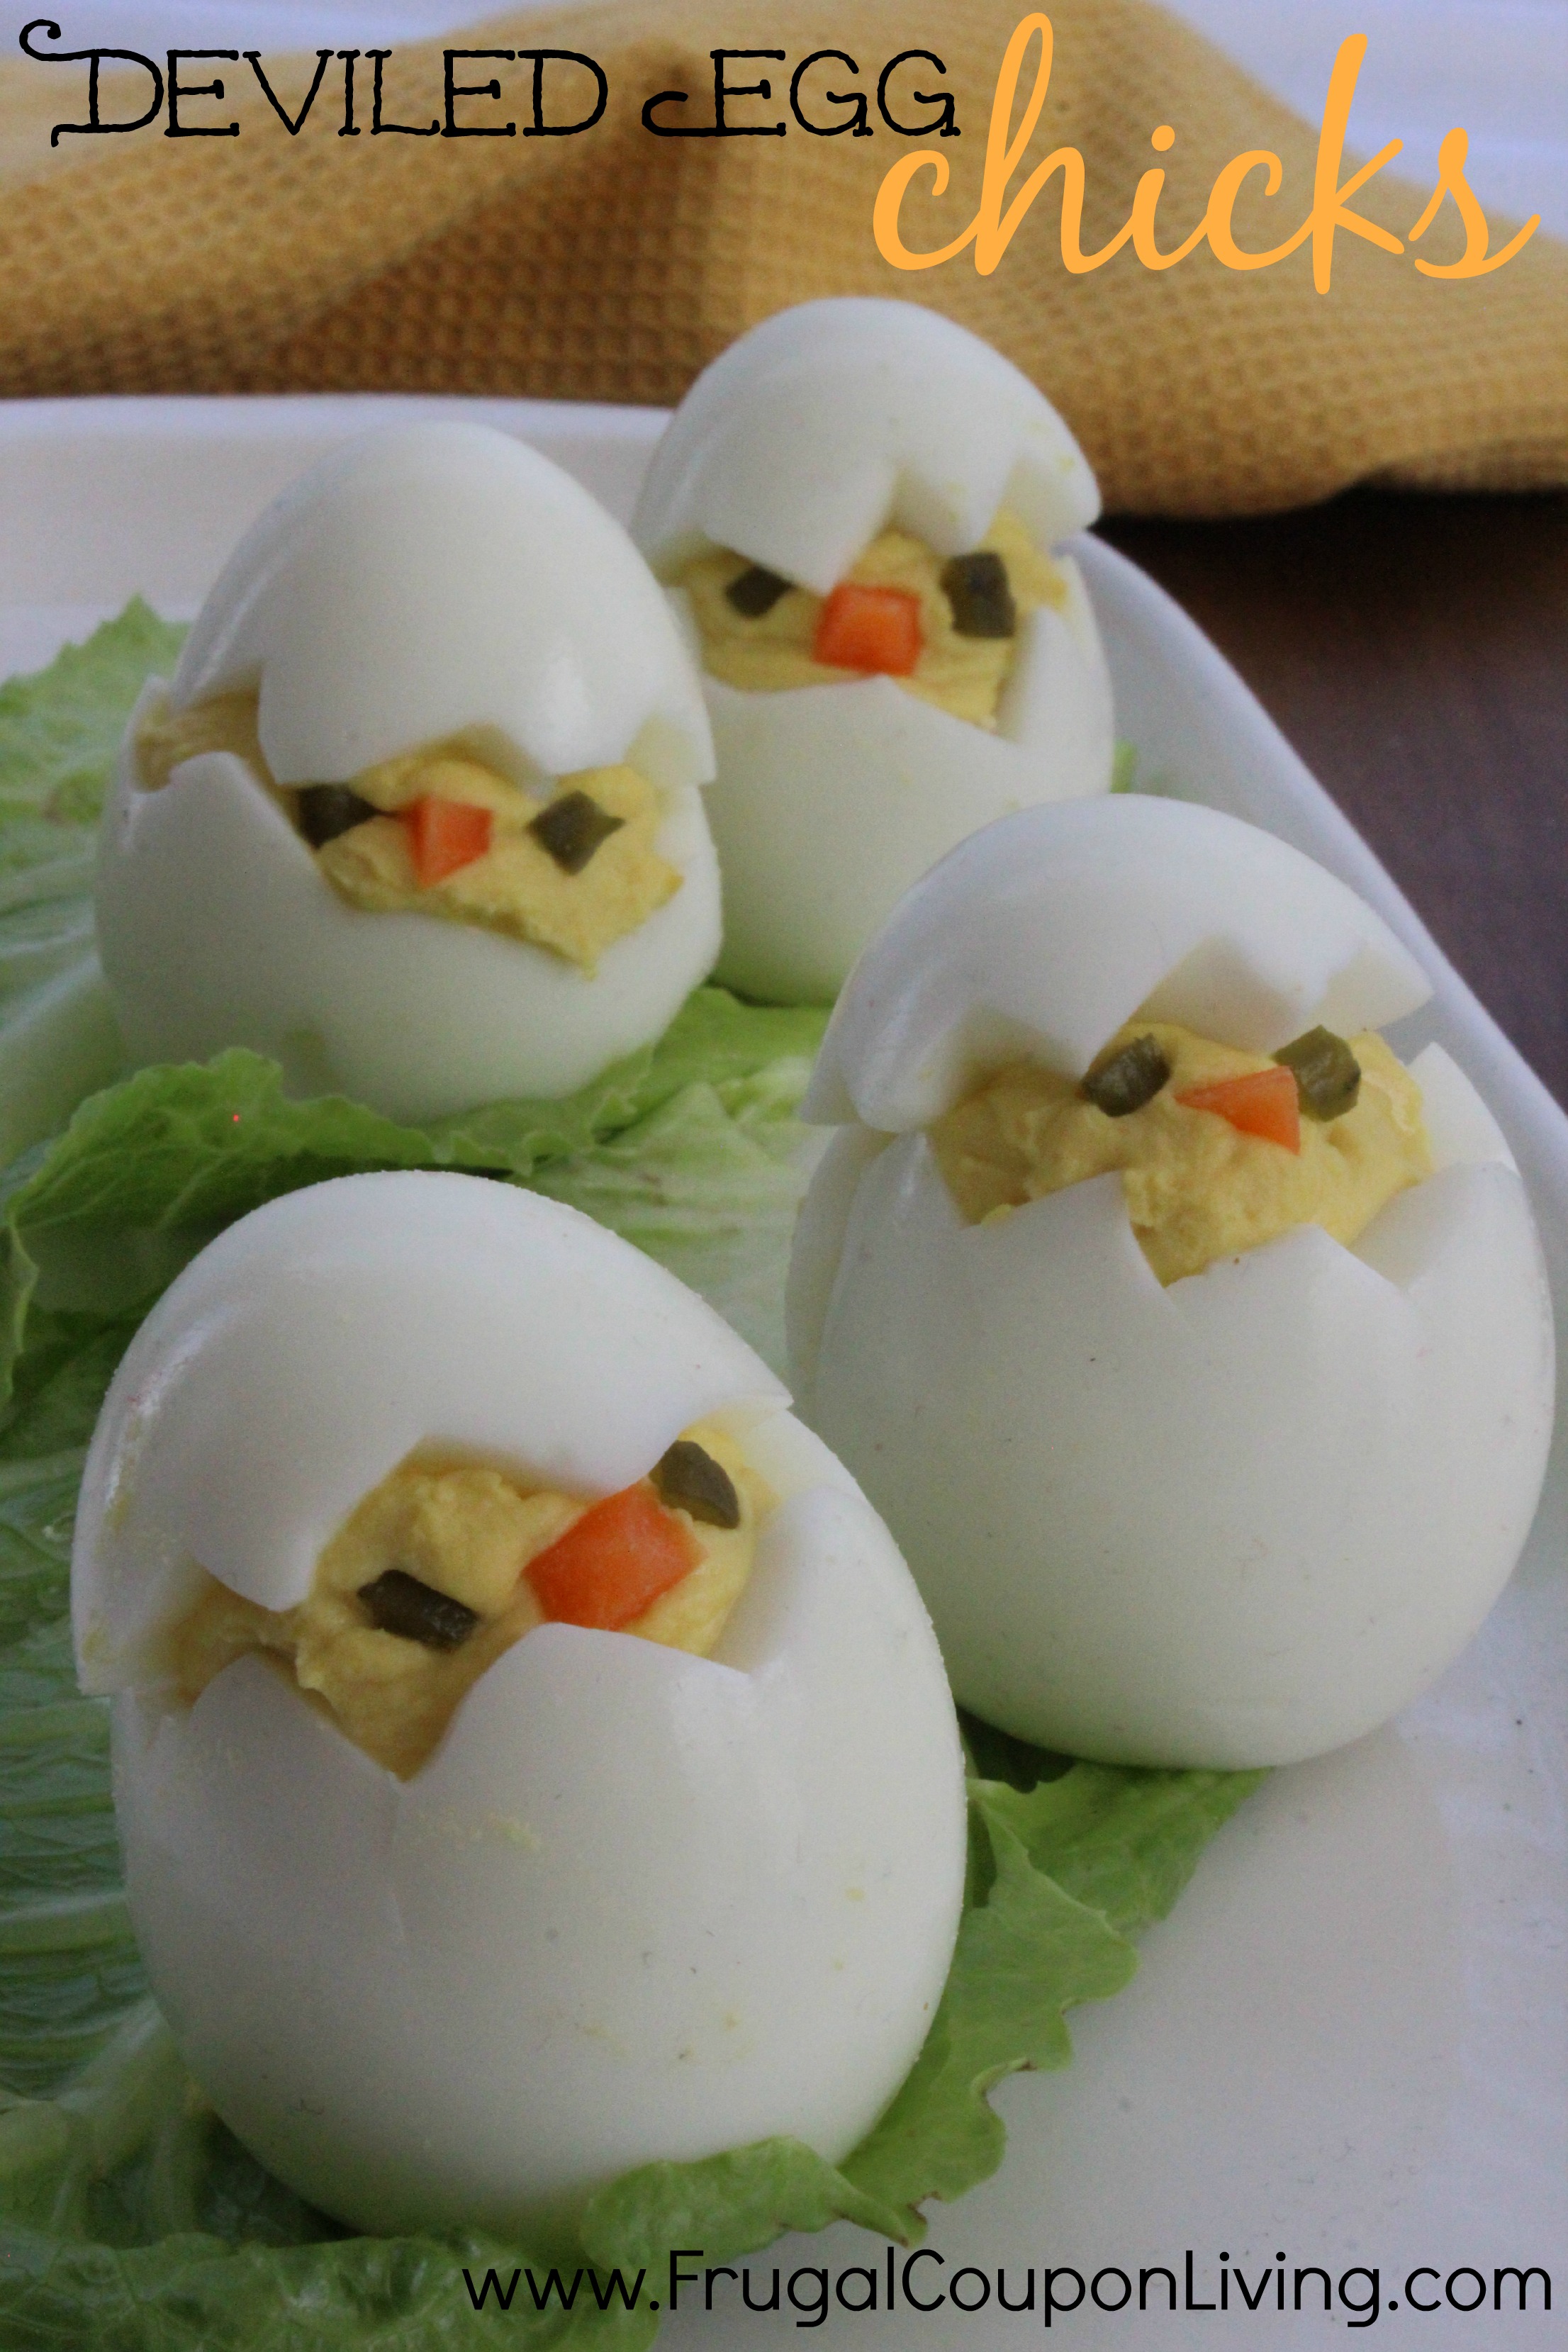 Easter Deviled Egg Chicks Recipe - Twist on the Norm